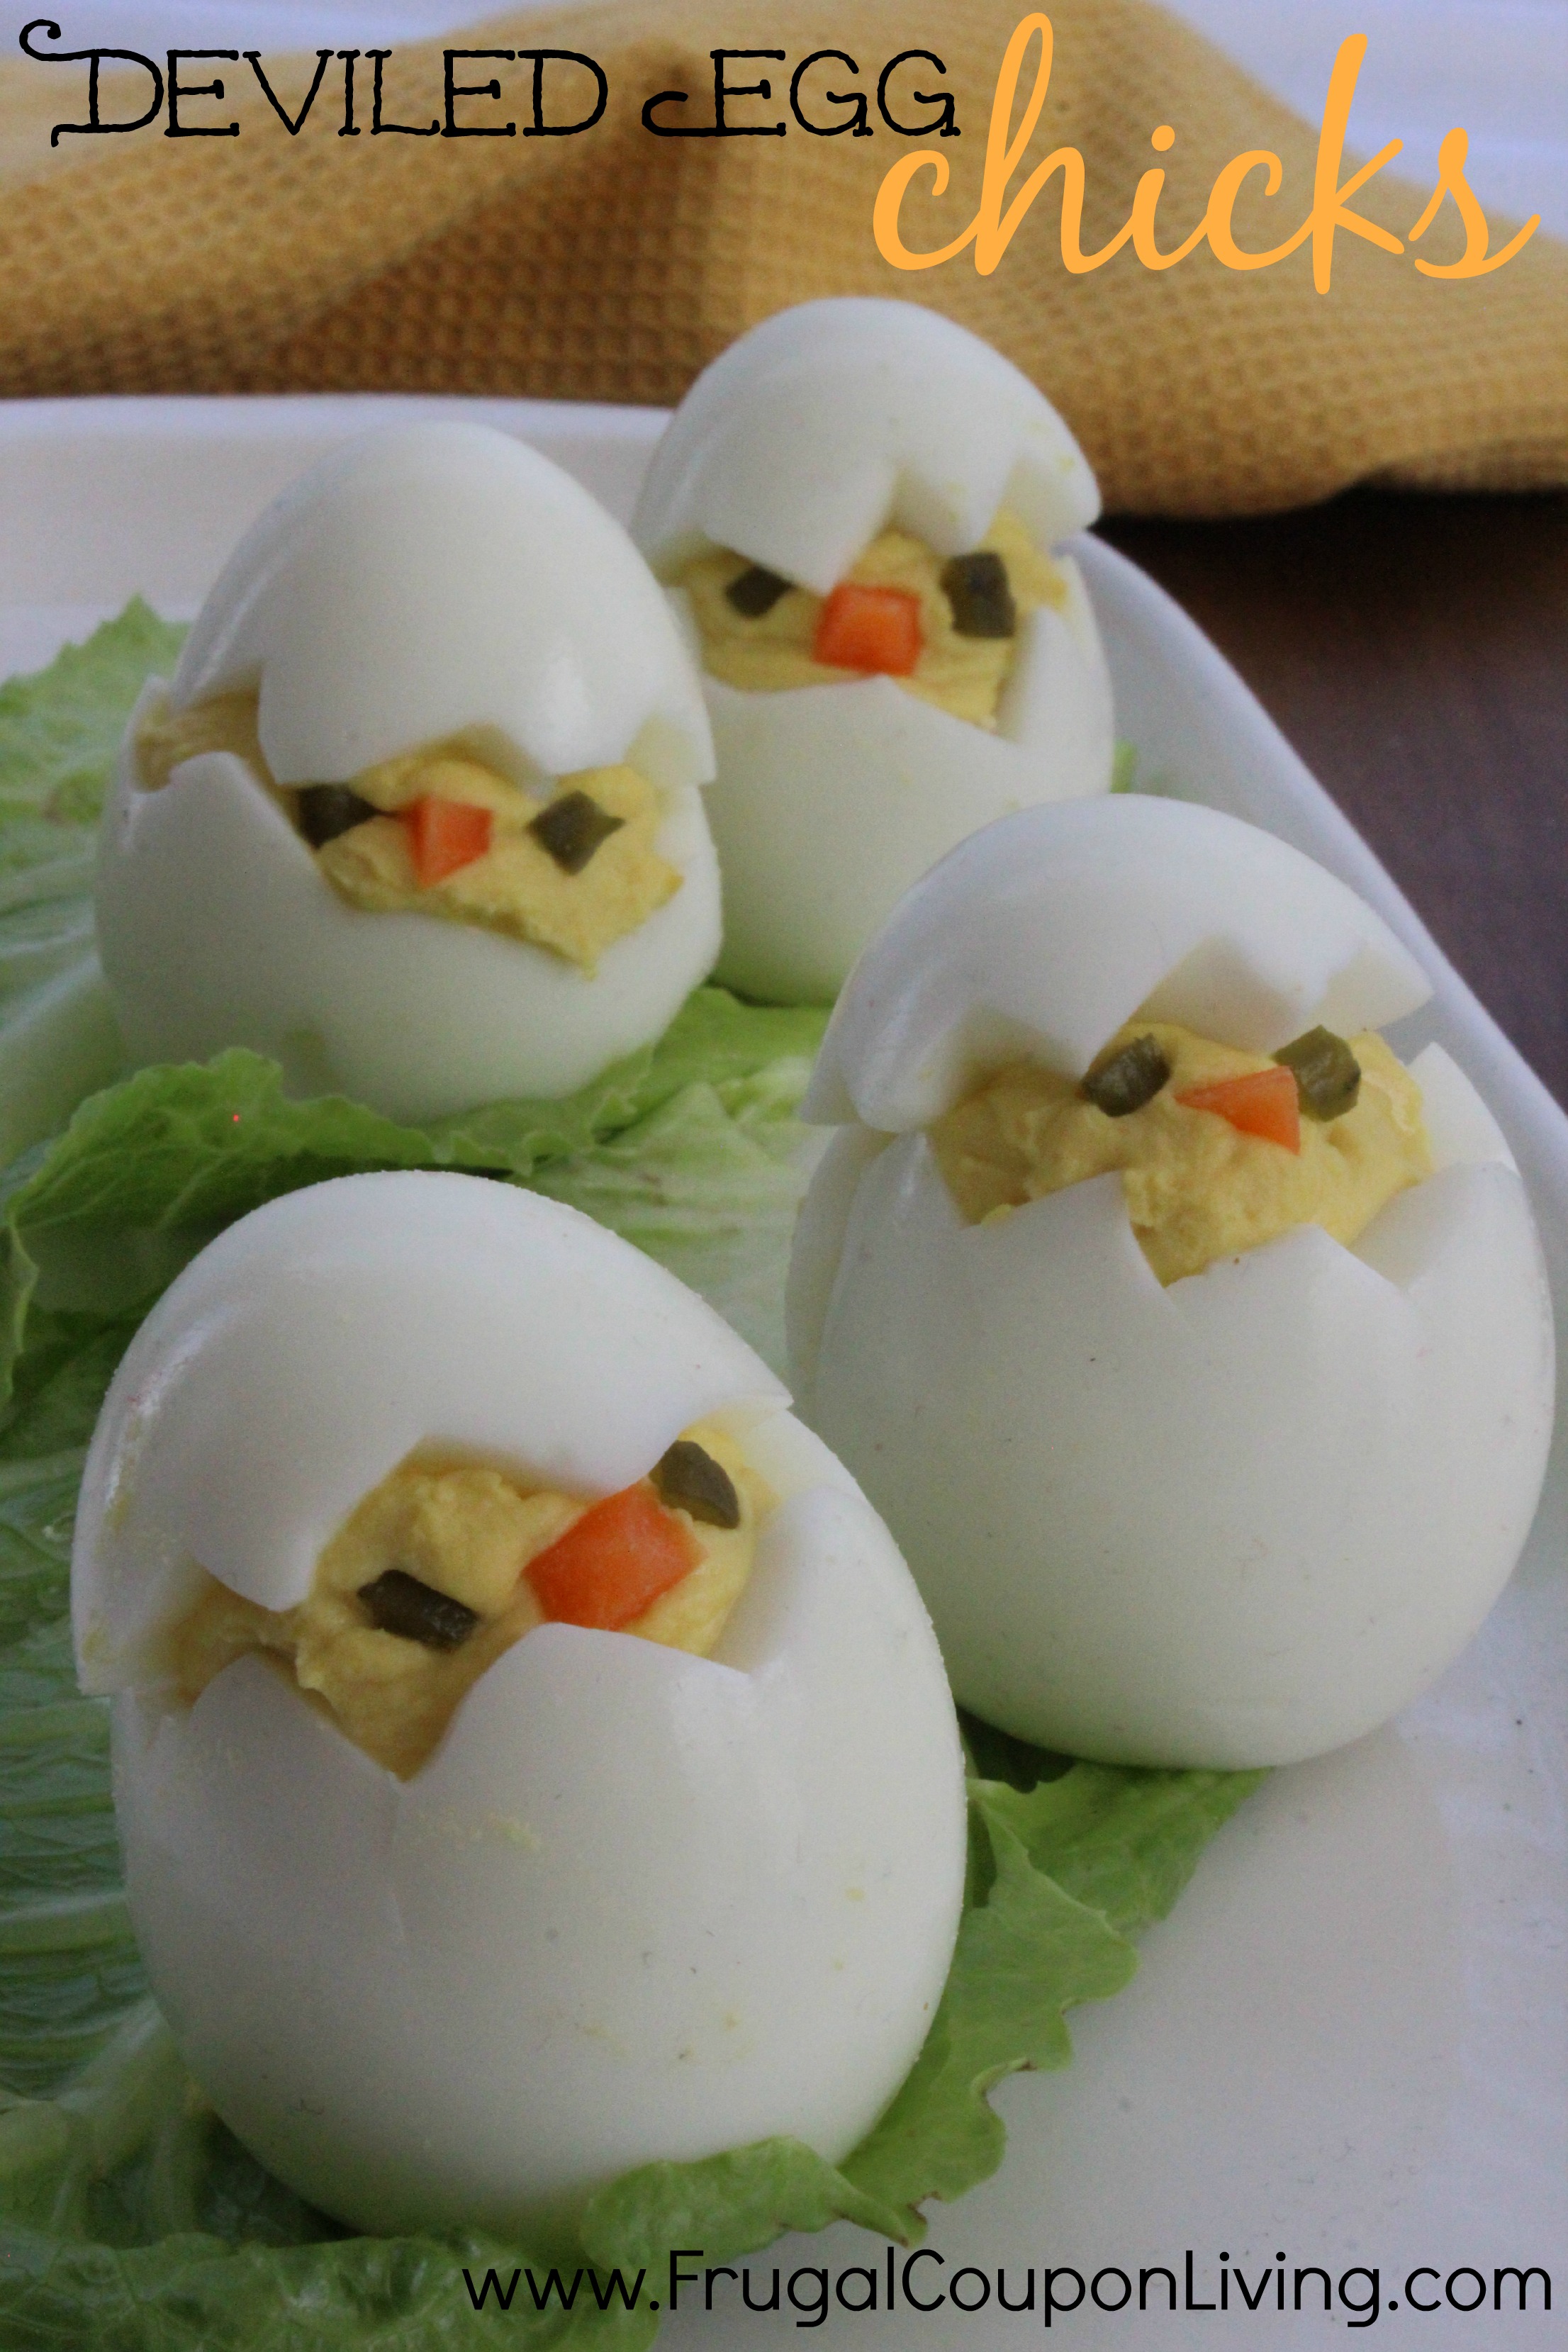 Easter Deviled Egg Chicks Recipe - Twist on the Norm